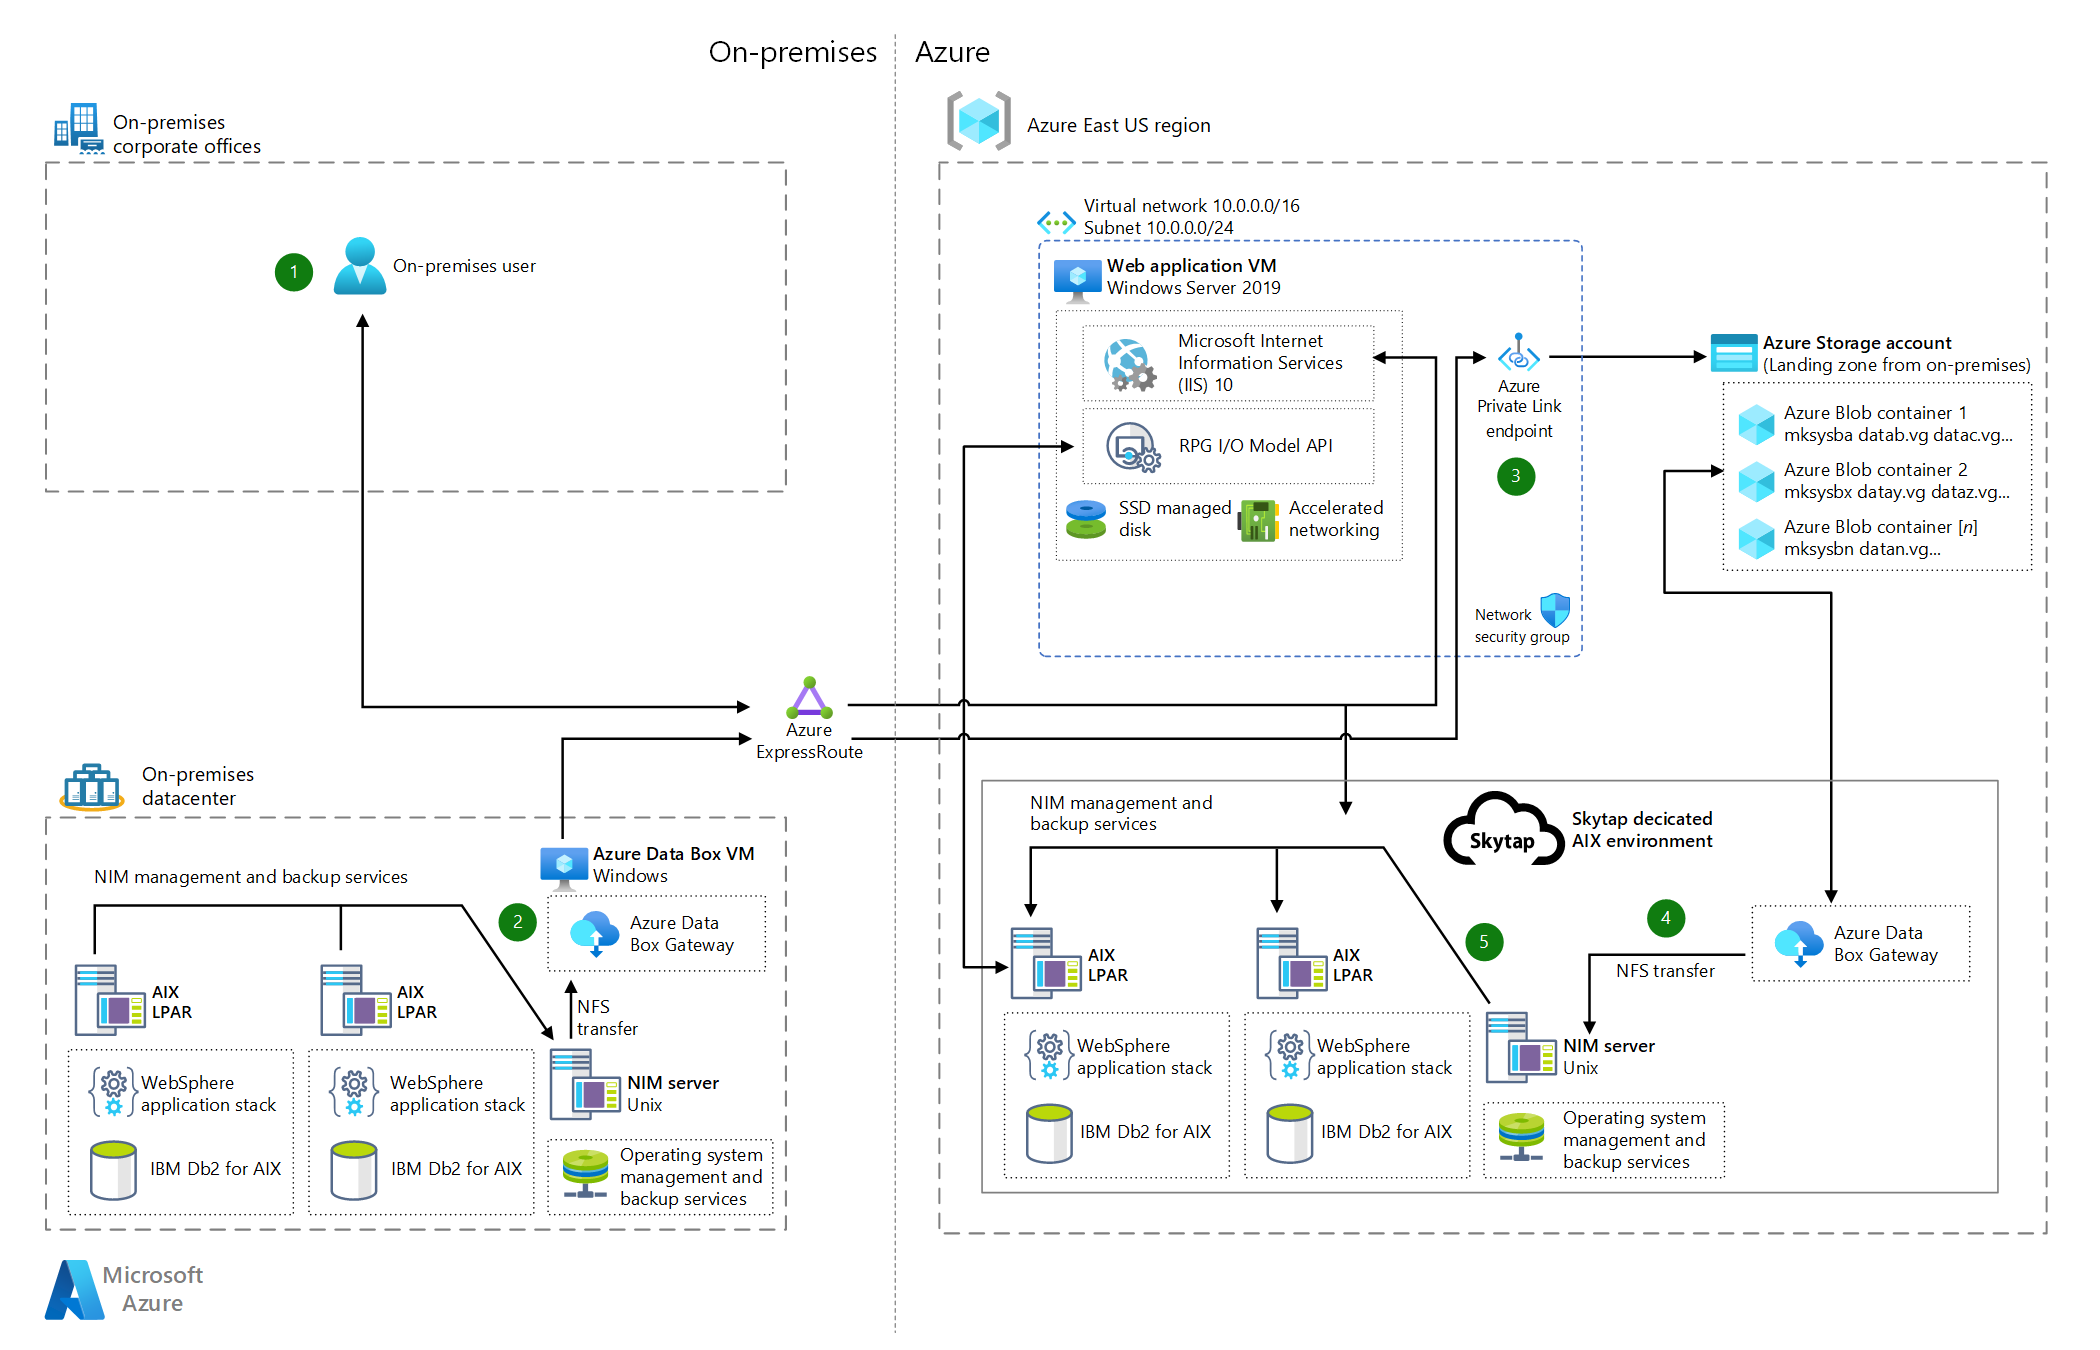 Migrate AIX workloads to Azure with Skytap - Azure Example Scenarios |  Microsoft Learn